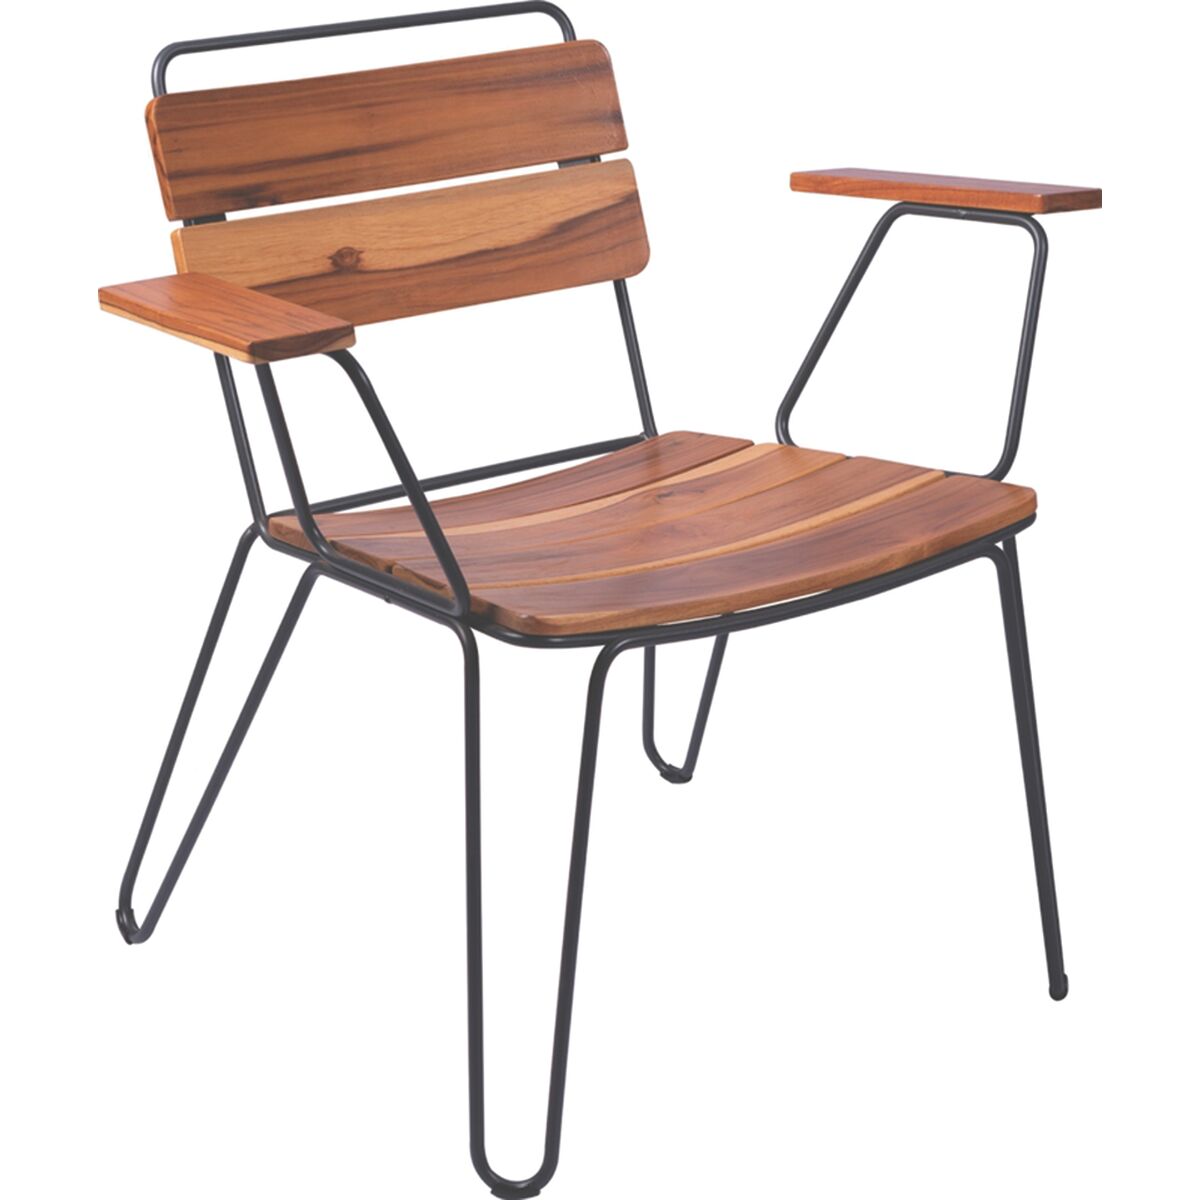 Tramontina Tarsila Chair with Teak Wood Arms, Carbon Steel Structure and Ecoclear Graphite Finish